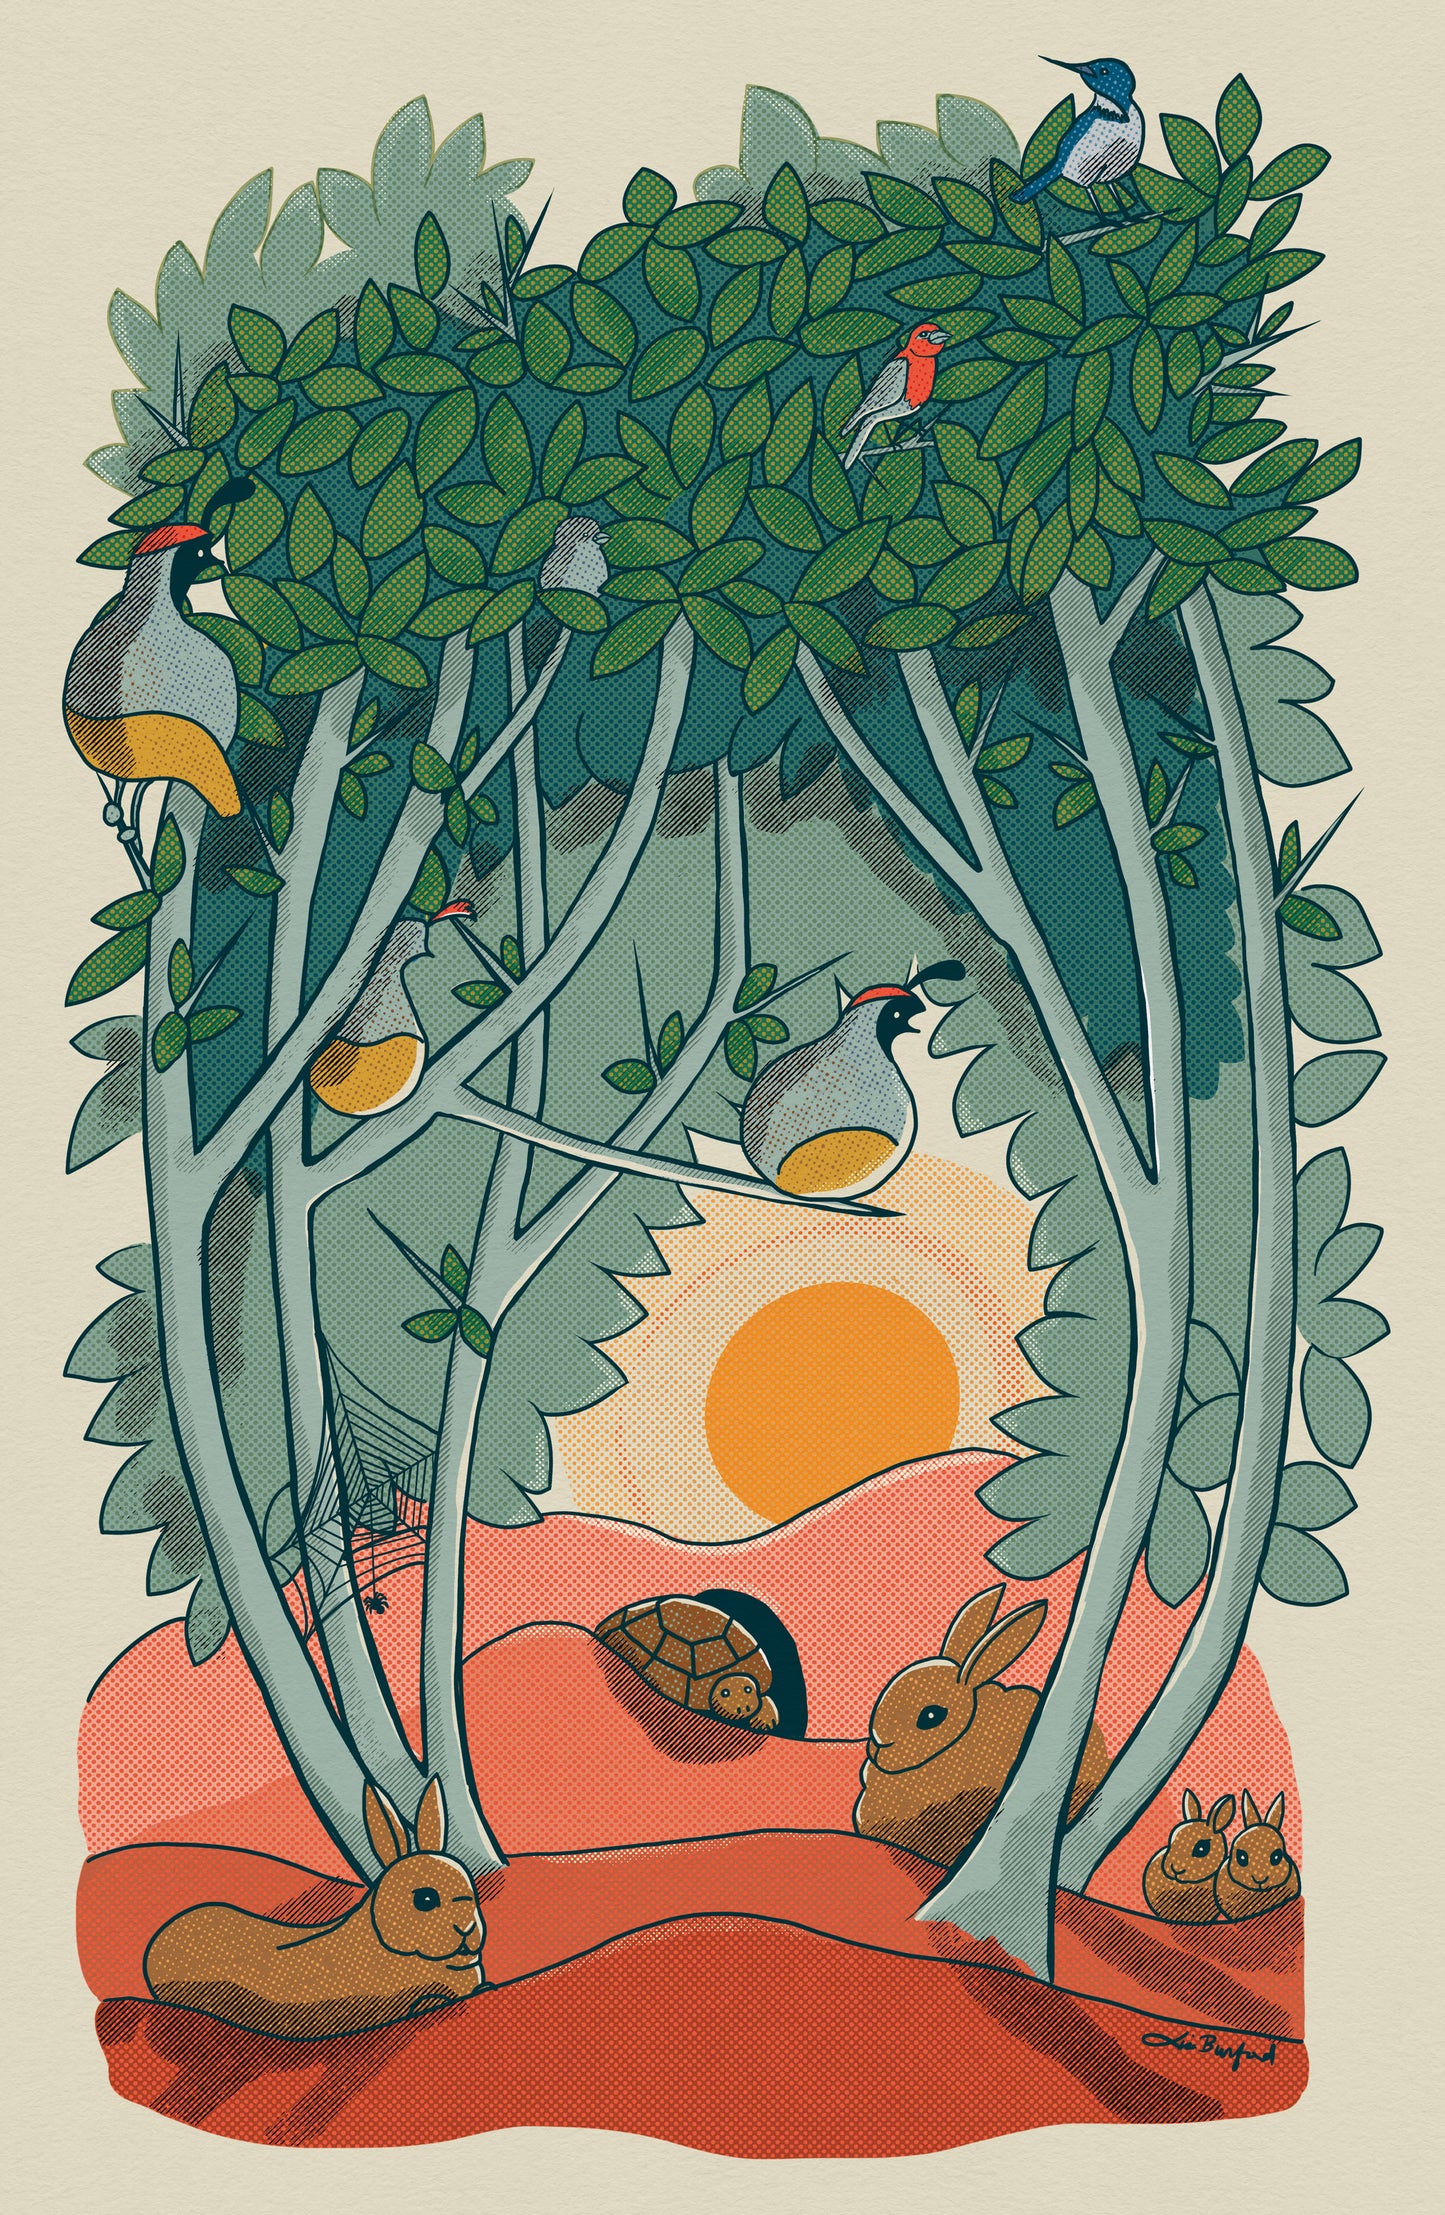 An 11"x17" illustrated print of animal characters found in a graythorn bush. Quail, cottontail bunnies, Western scrub jay, house finches, and a desert tortoise all hang out inside and underneath the branches of this bush. A sun can be seen setting in the background through an opening in the branches.